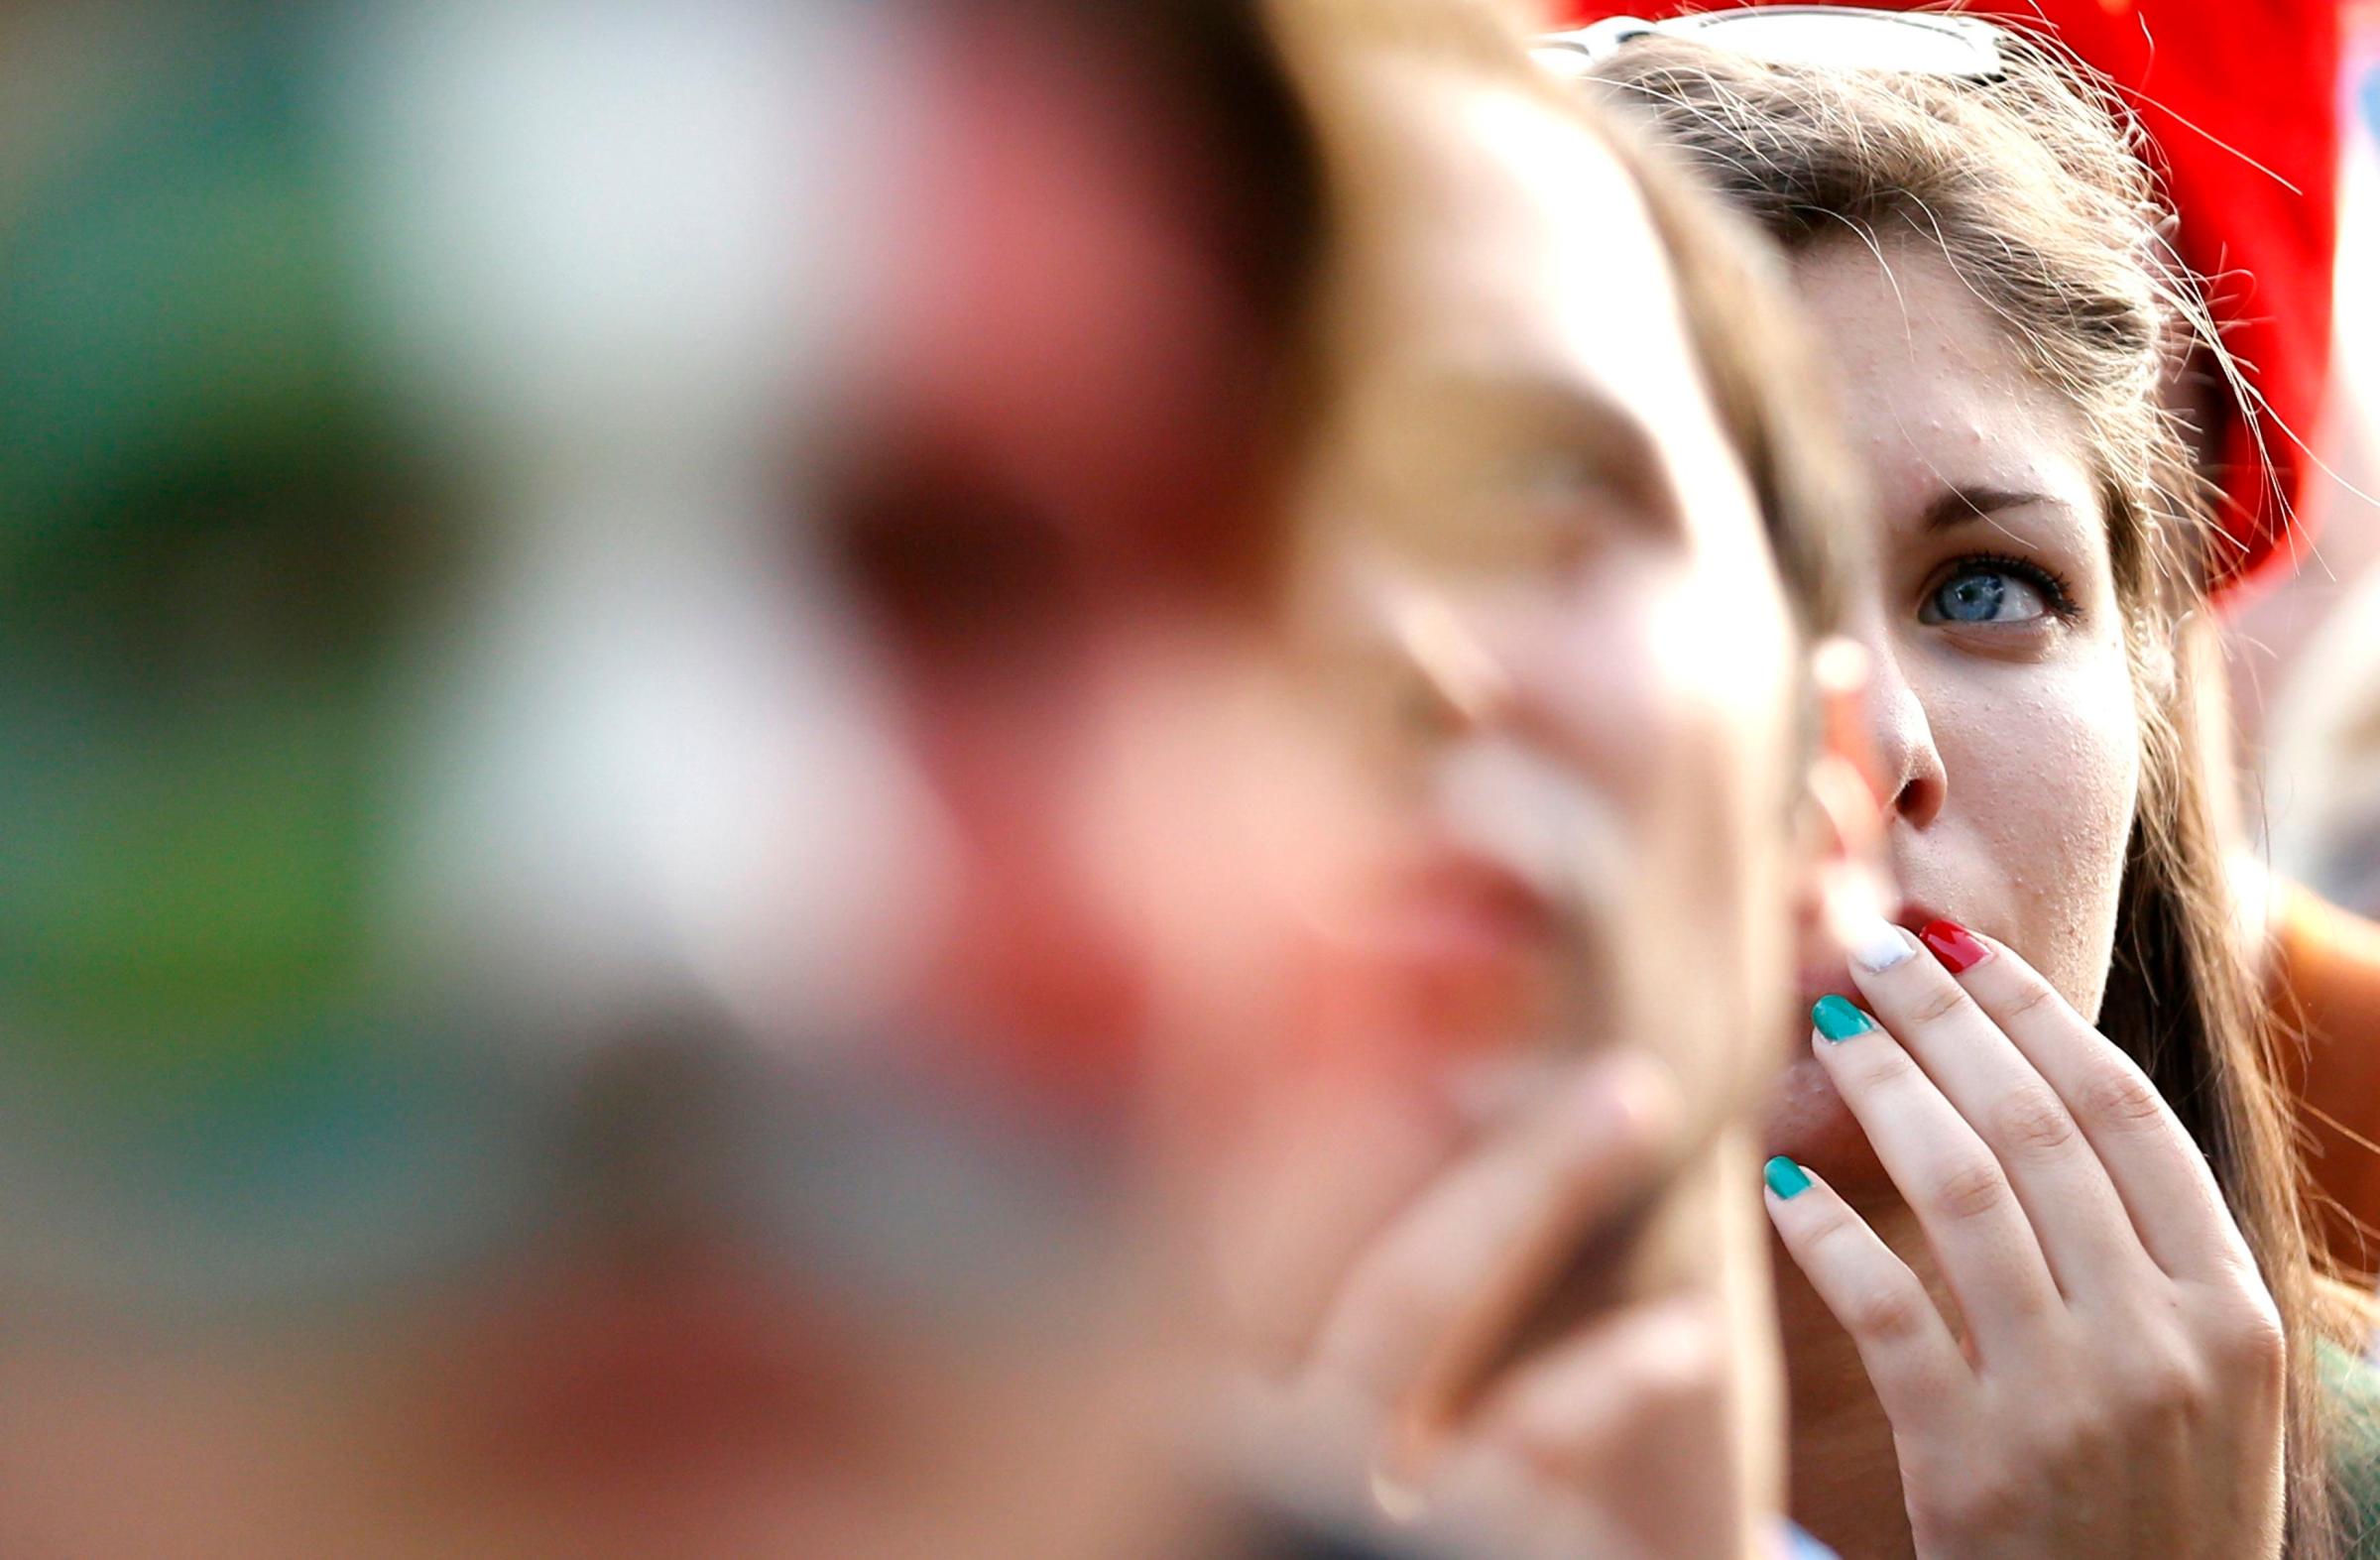 A fan reacts as she watches the 2014 World Cup soccer match between Italy and Uruguay, in Rome on June 24, 2014.